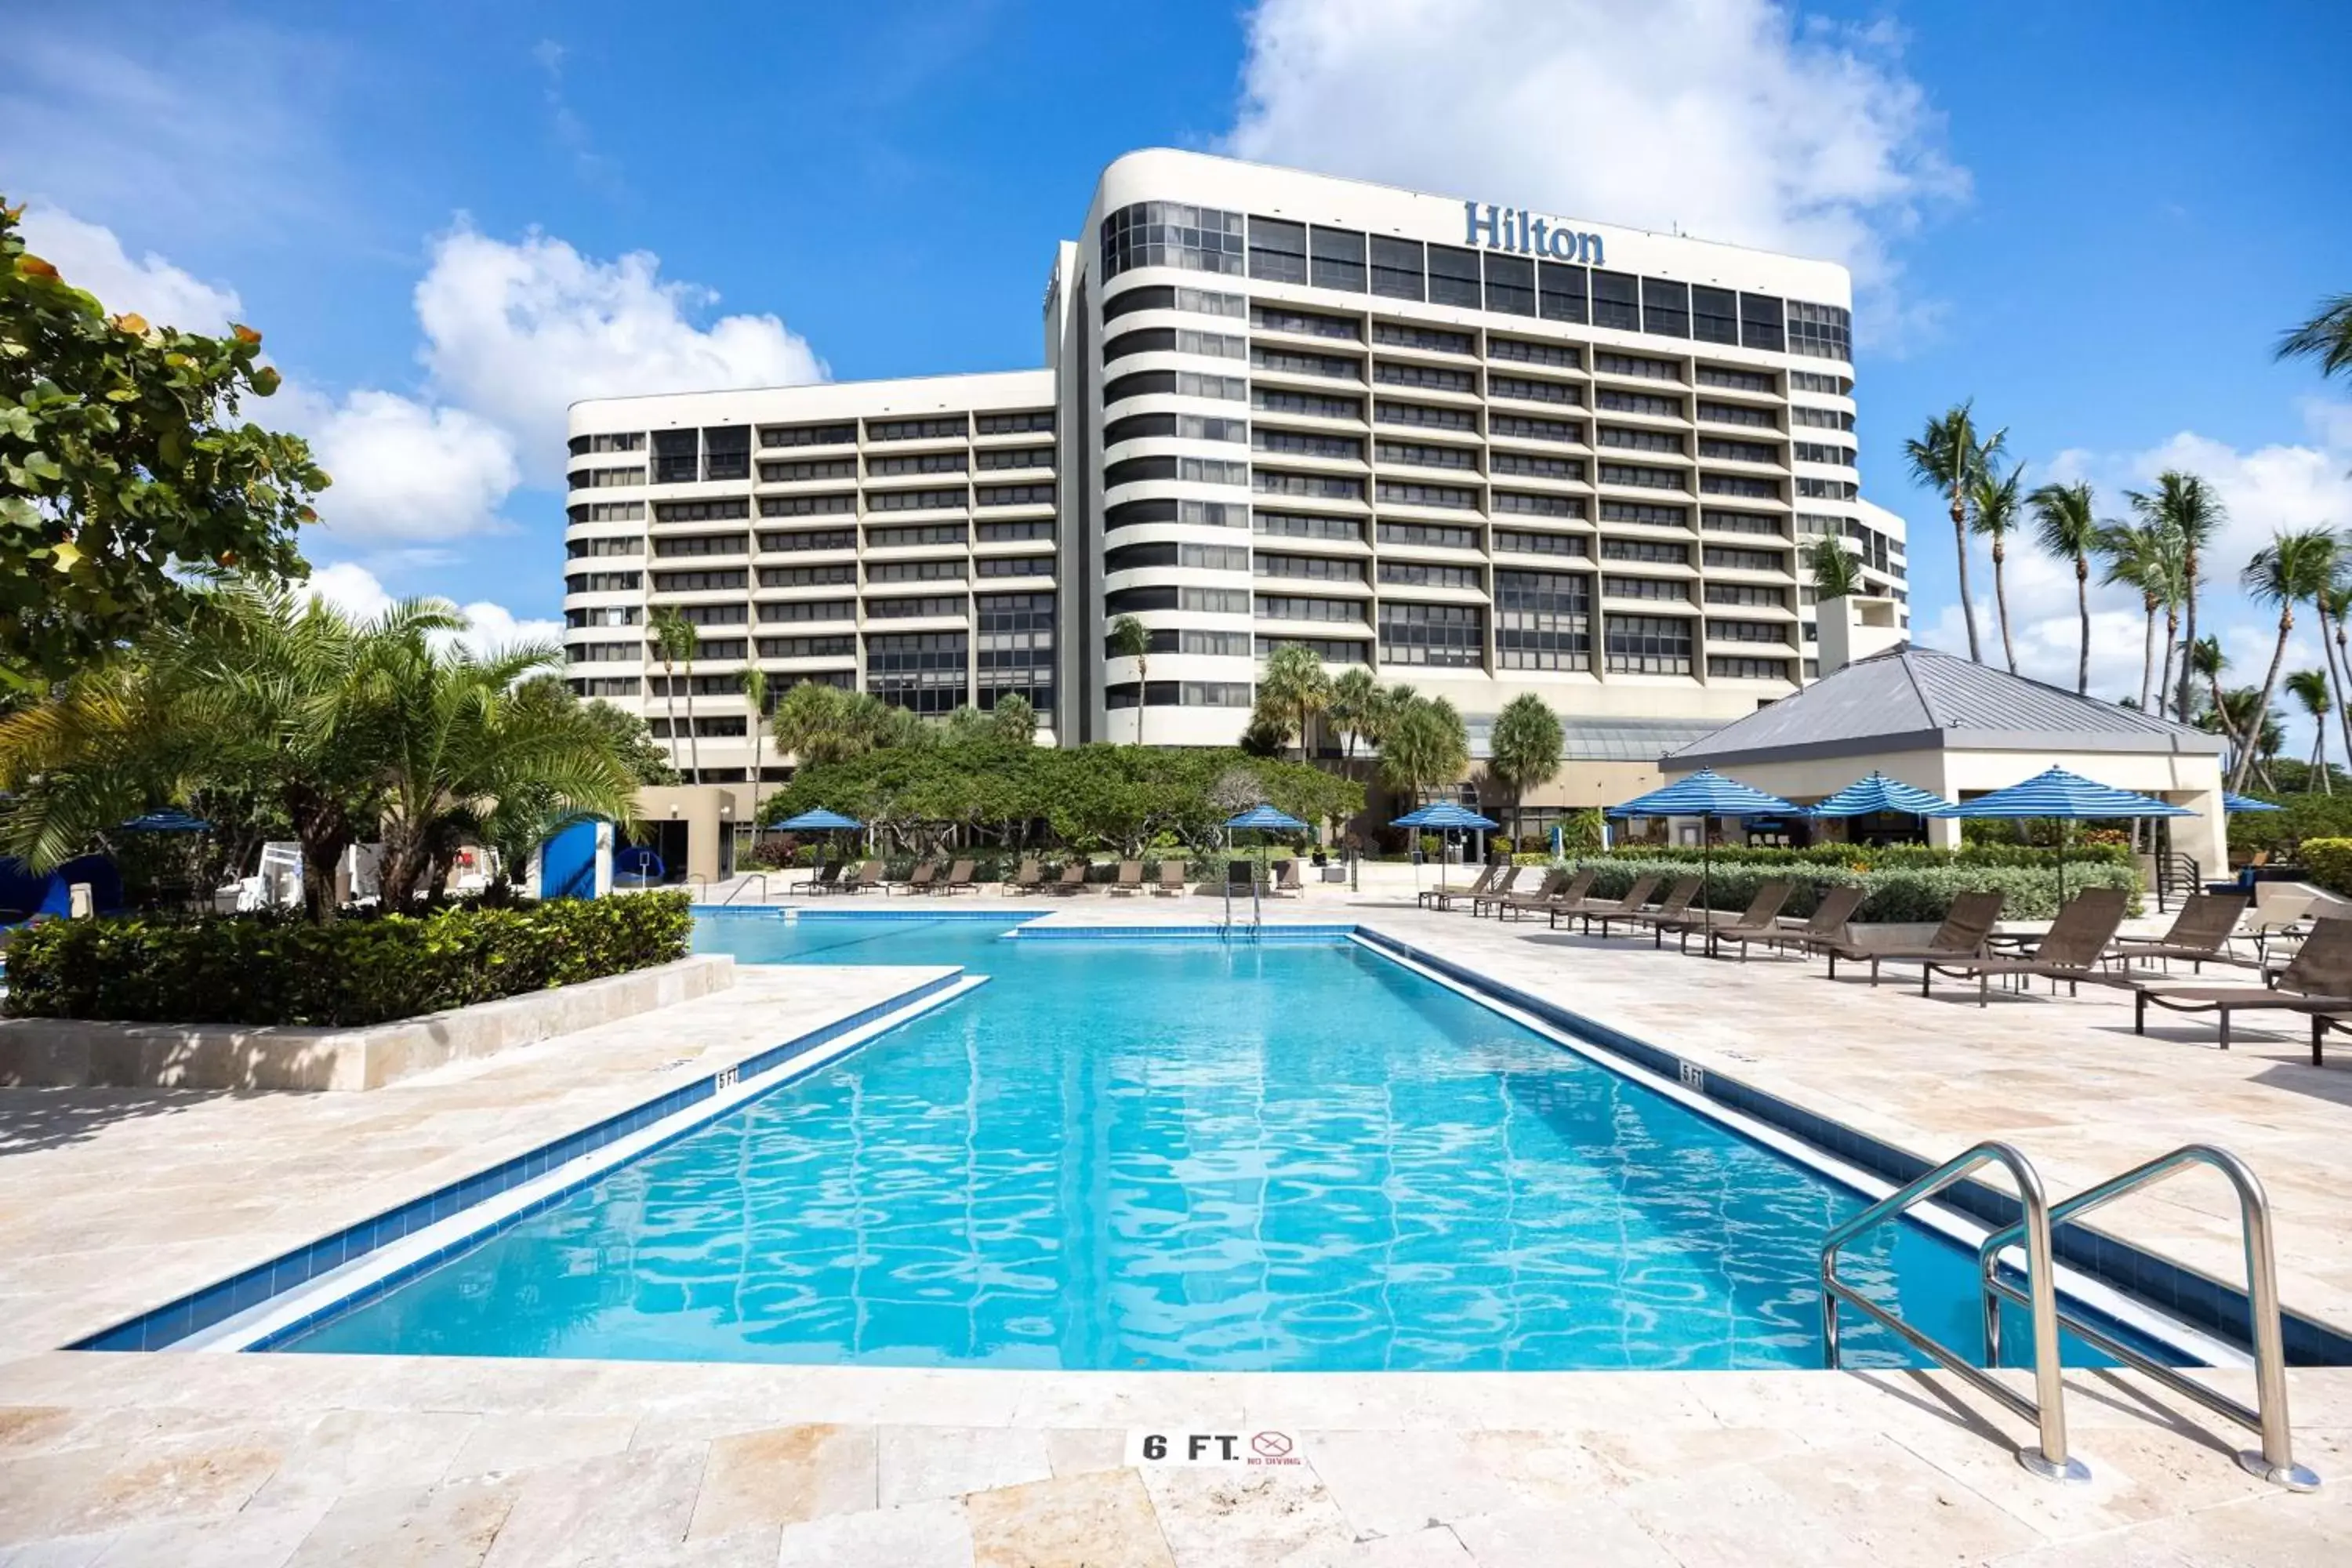 Pool view, Property Building in Hilton Miami Airport Blue Lagoon